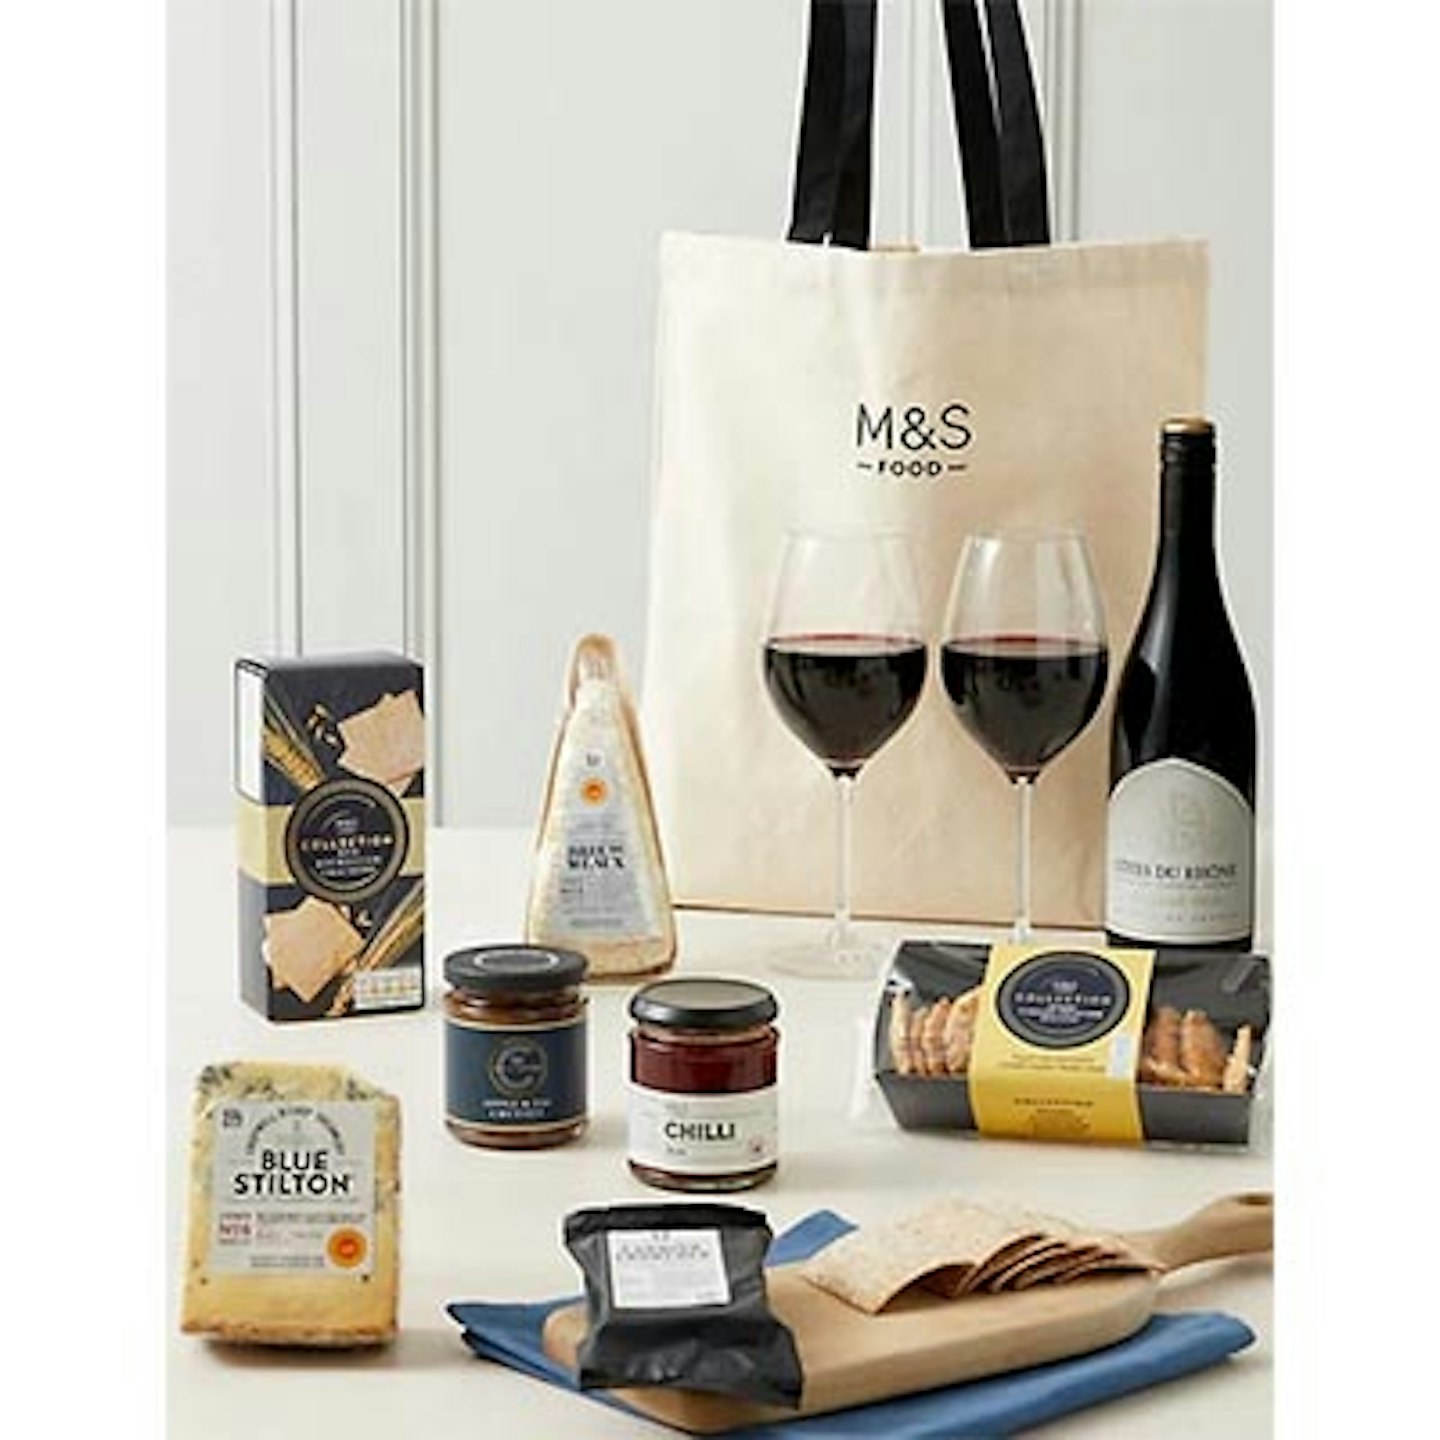 30% off selected hampers